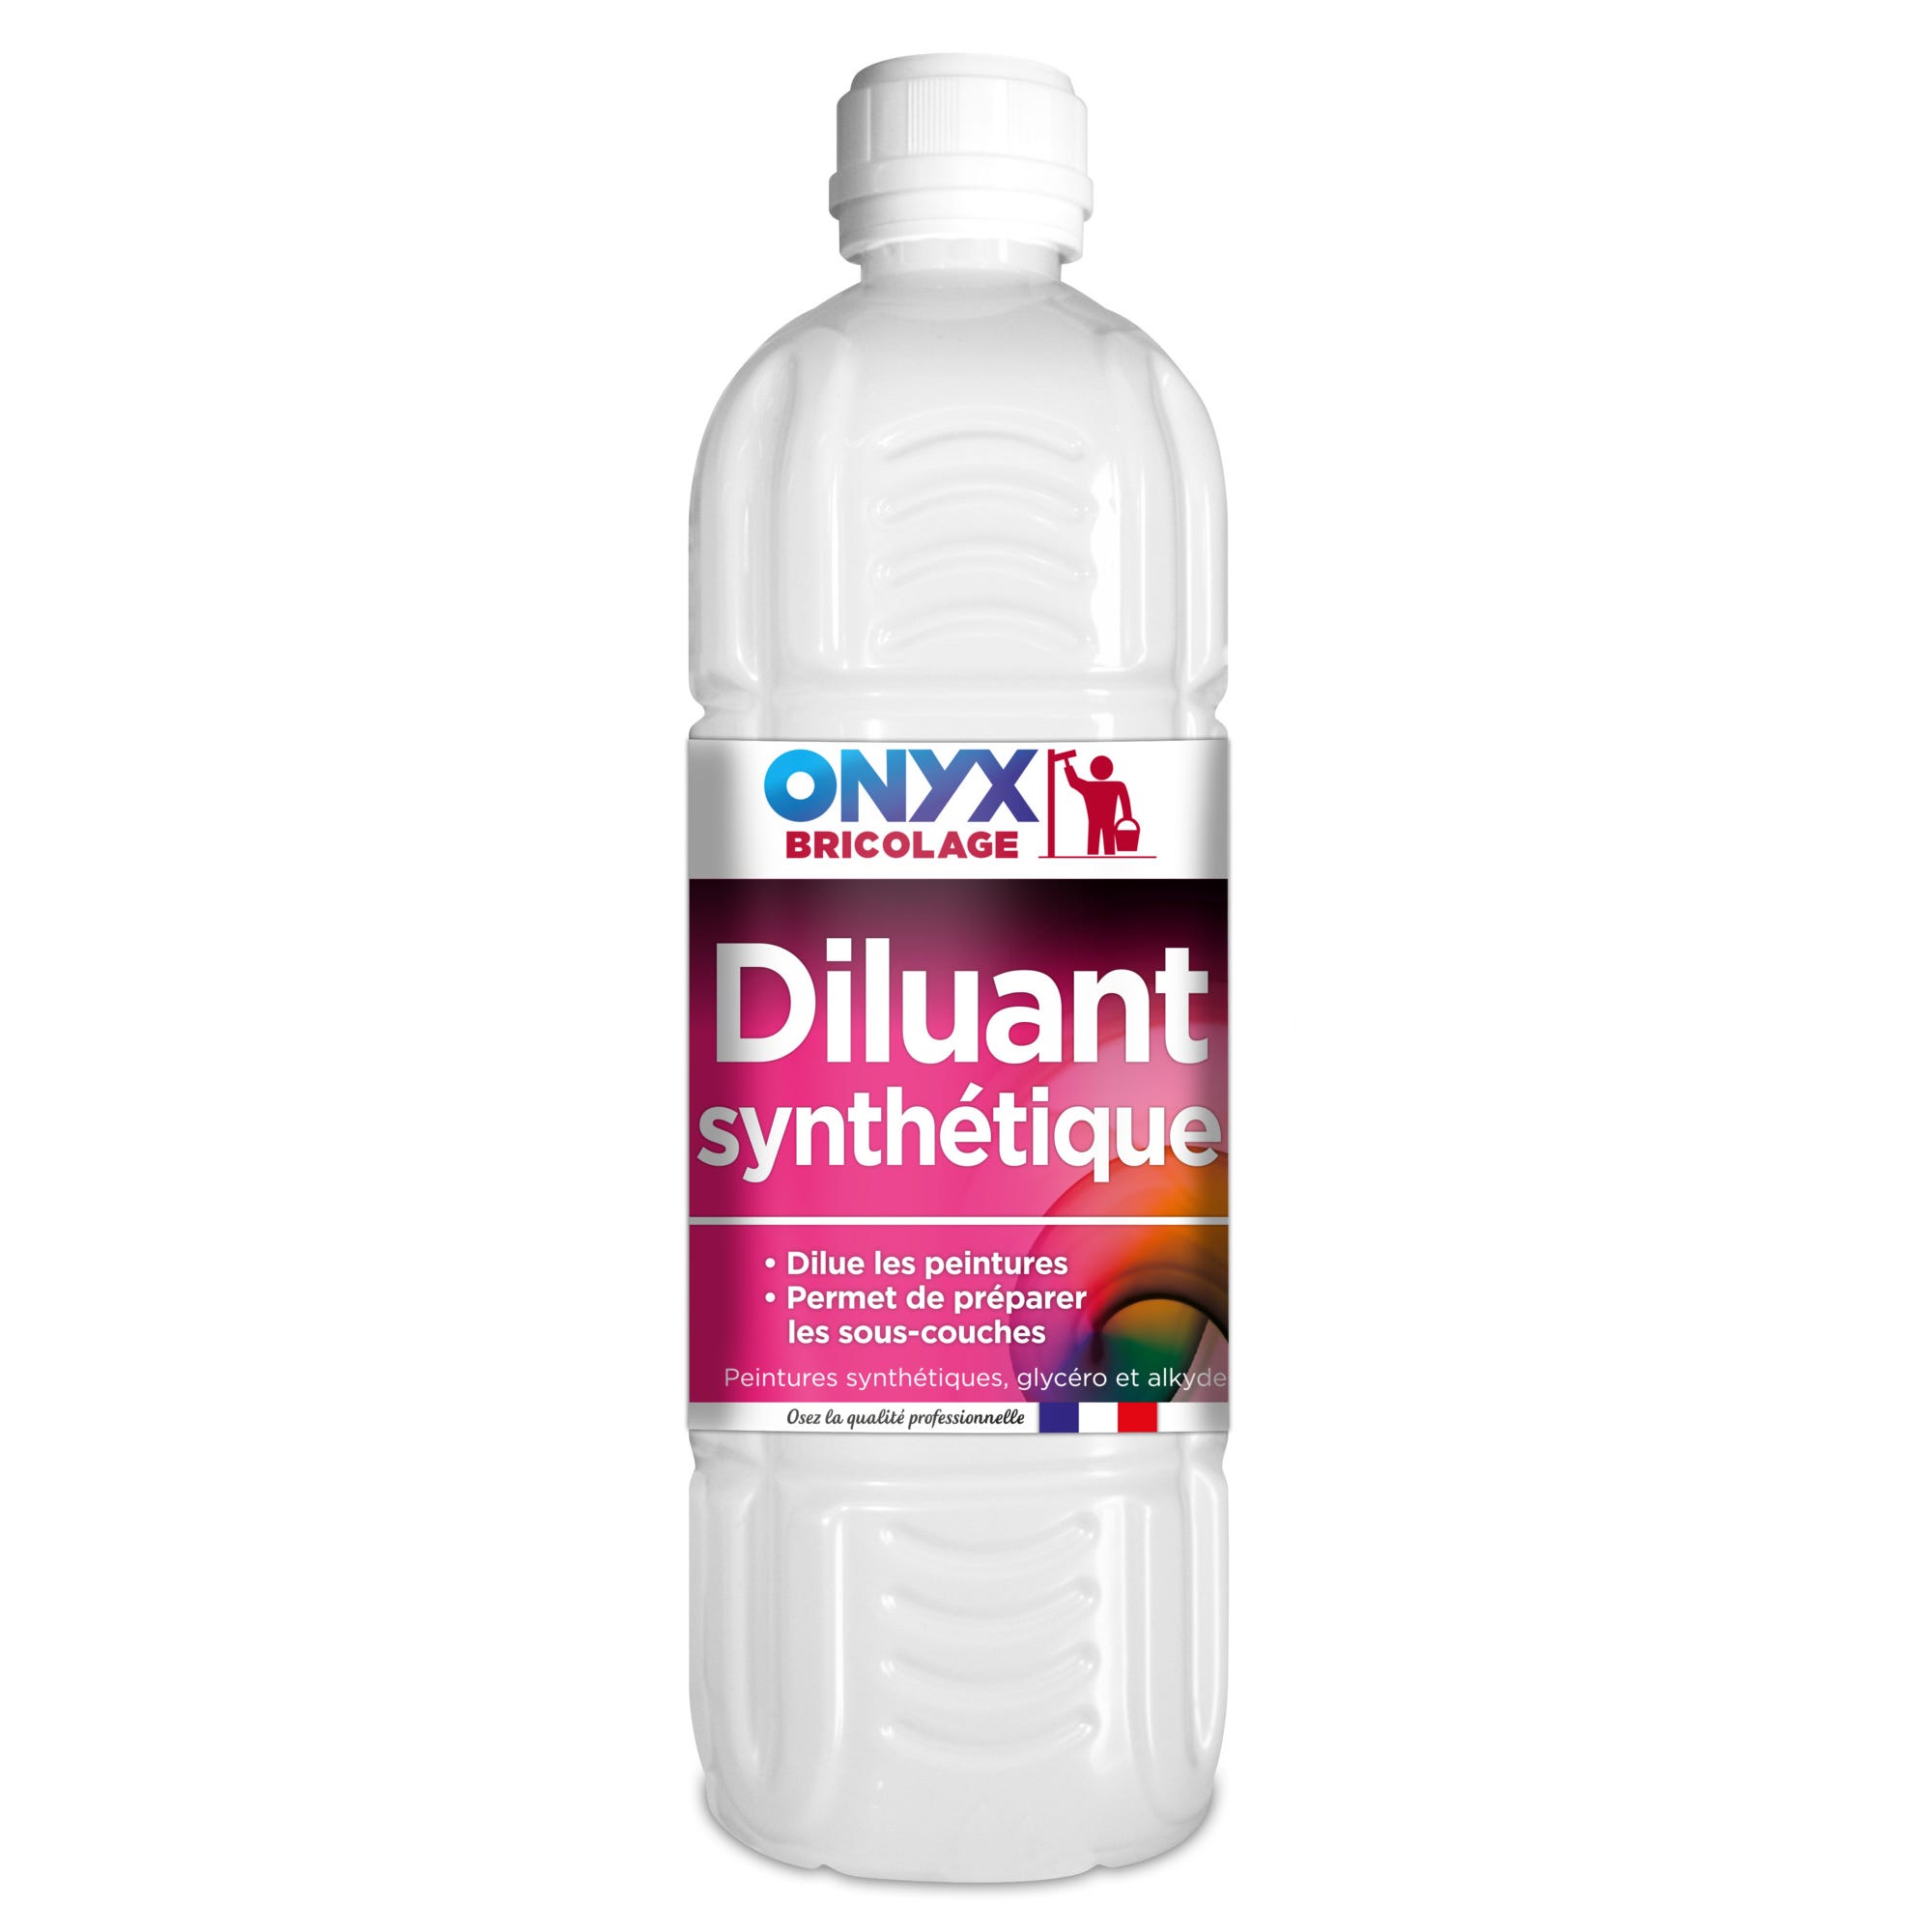 Diluant synthétique 1 L - ONYX 0